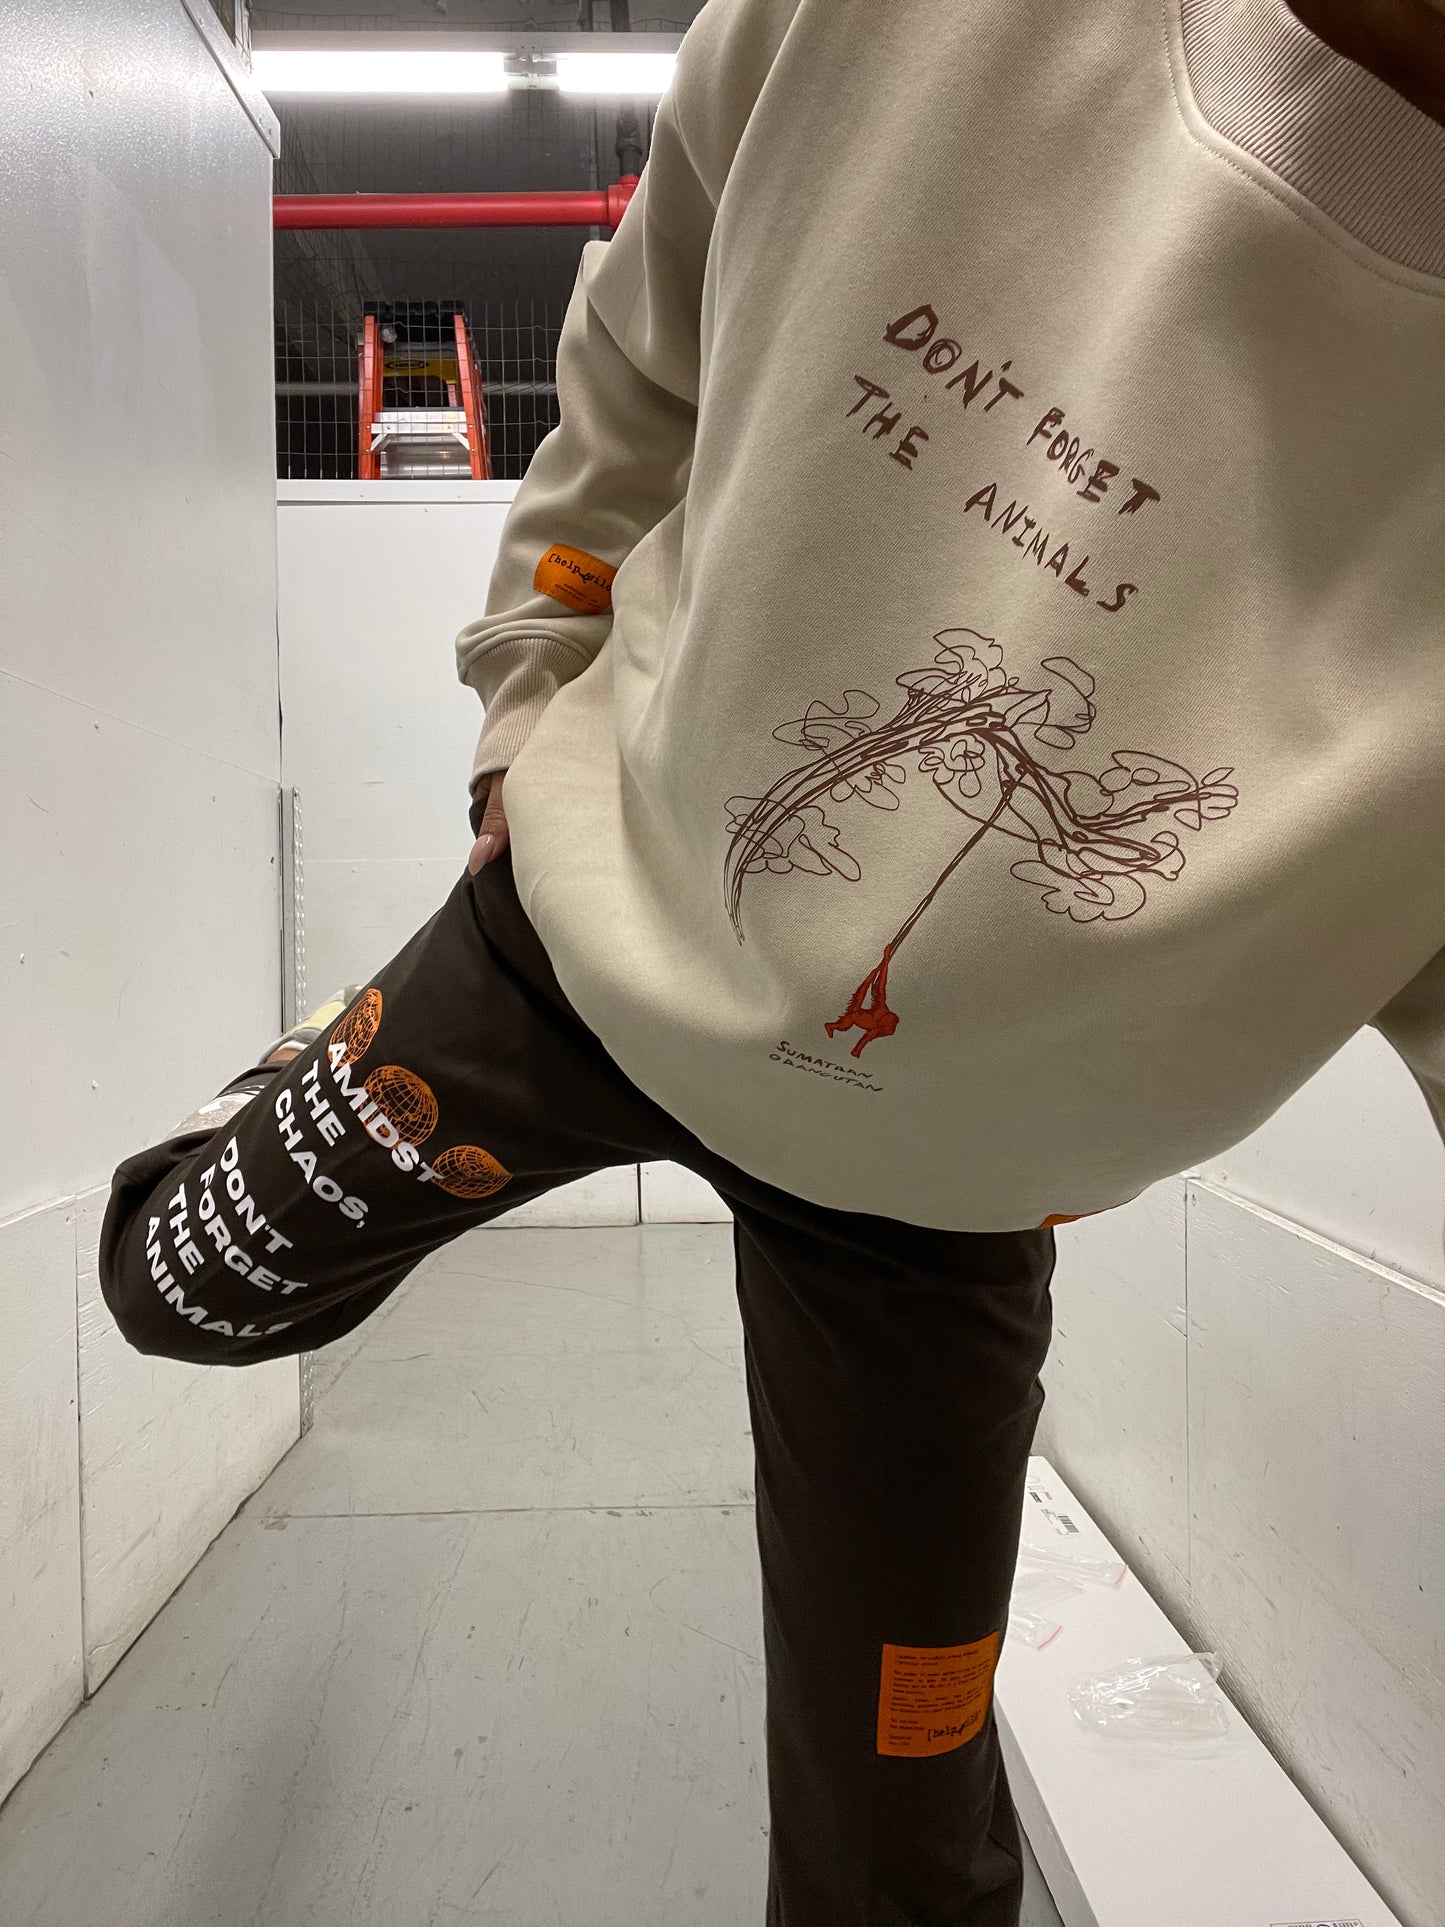 Orangutan Endangered Species sweater made of organic cotton in the streetwear style